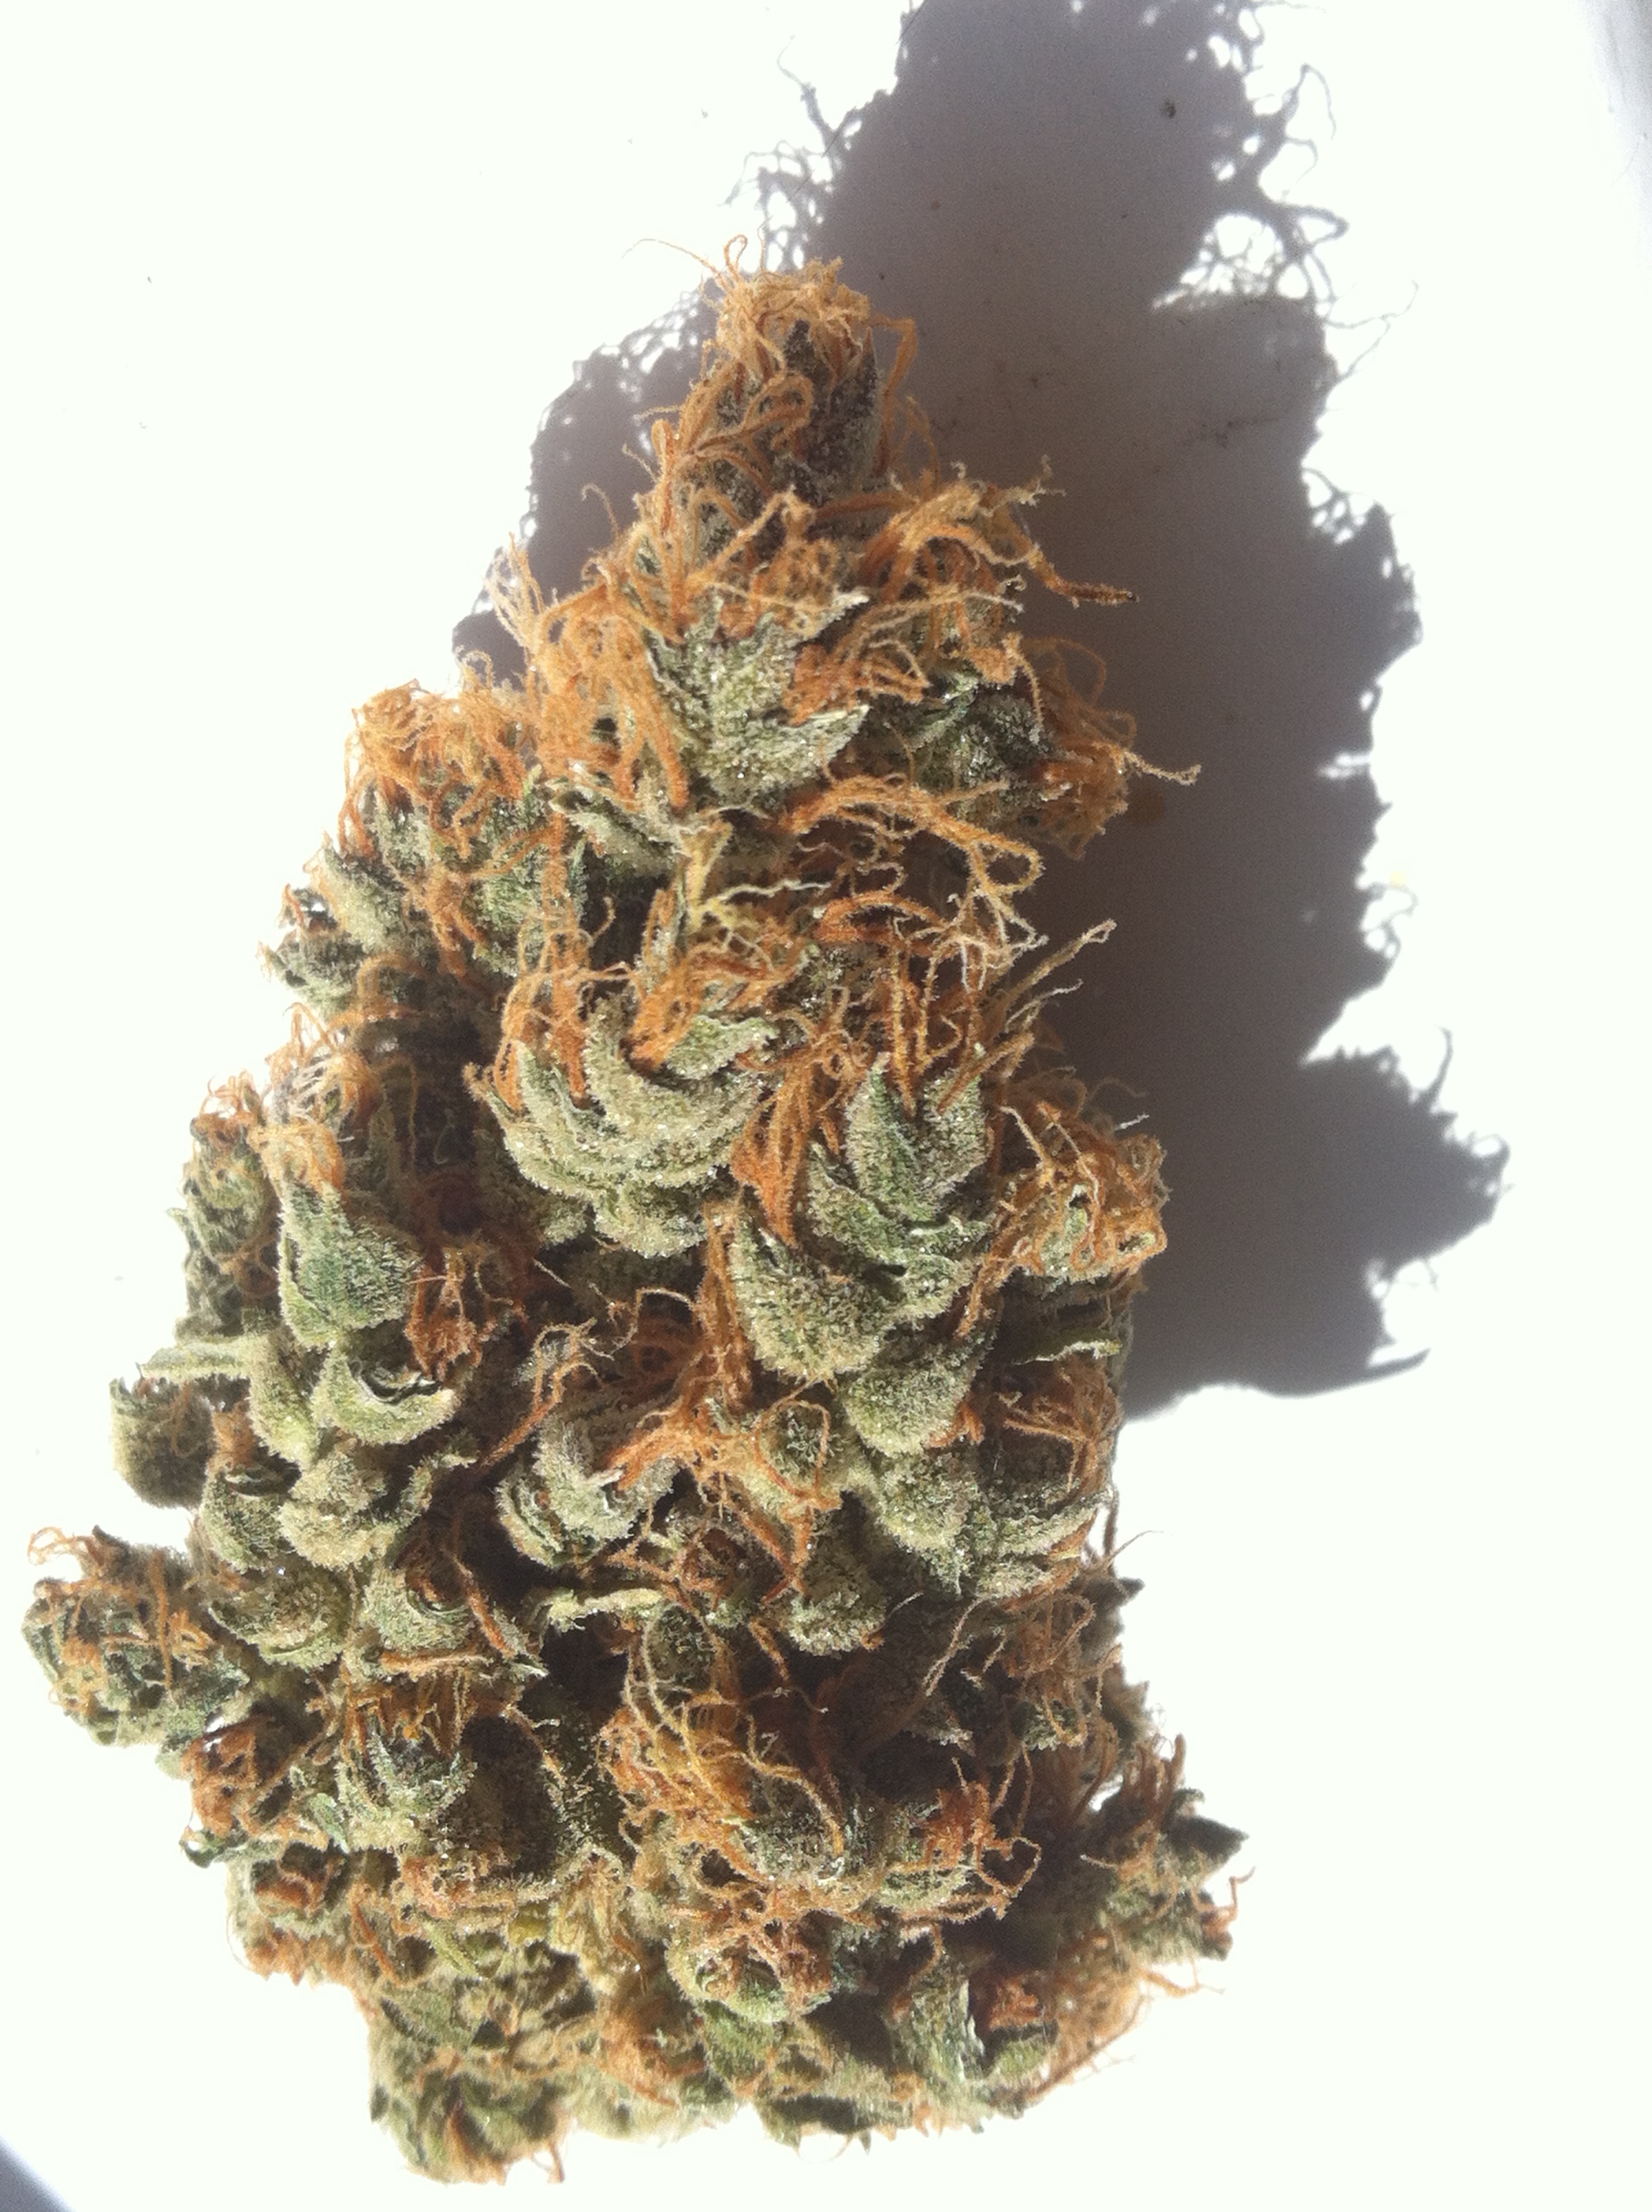 frosty buds and orange hair